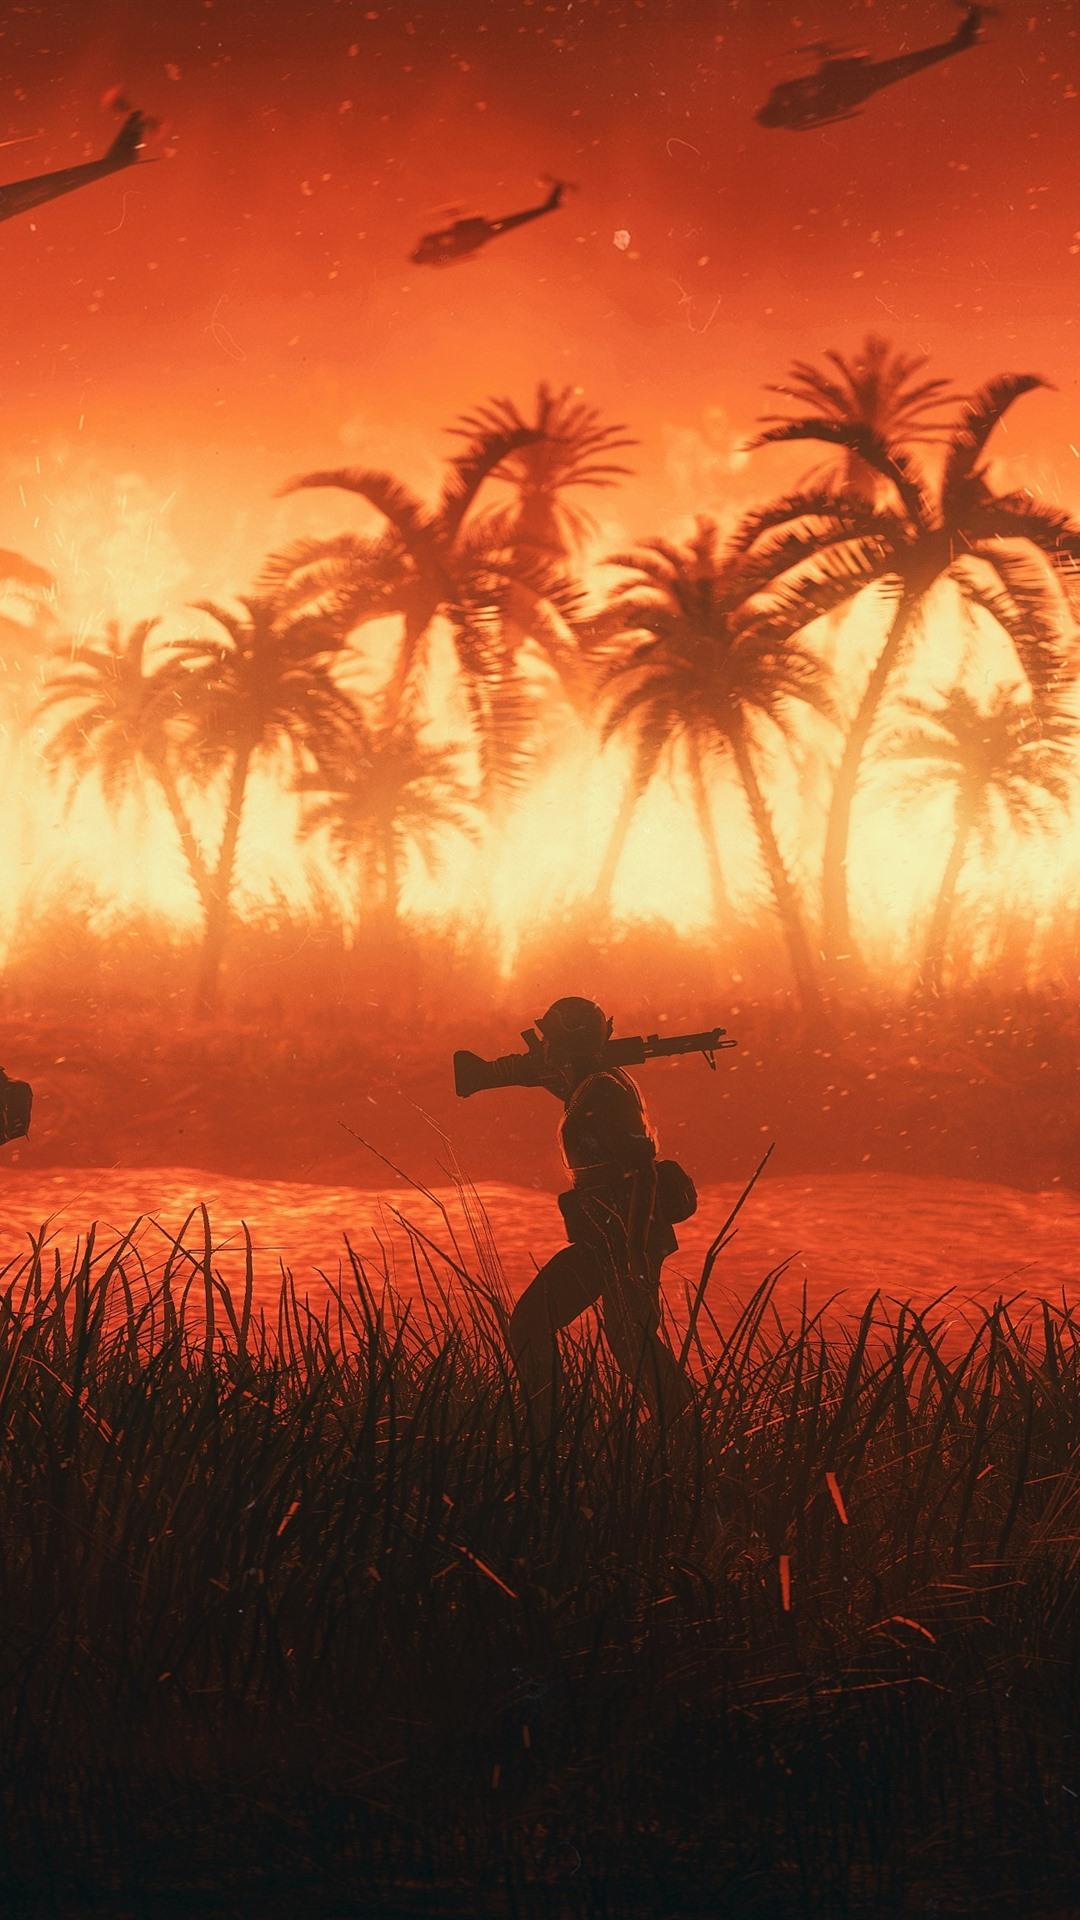 Palm trees, Vietnam, soldiers, helicopter, fire, war, art